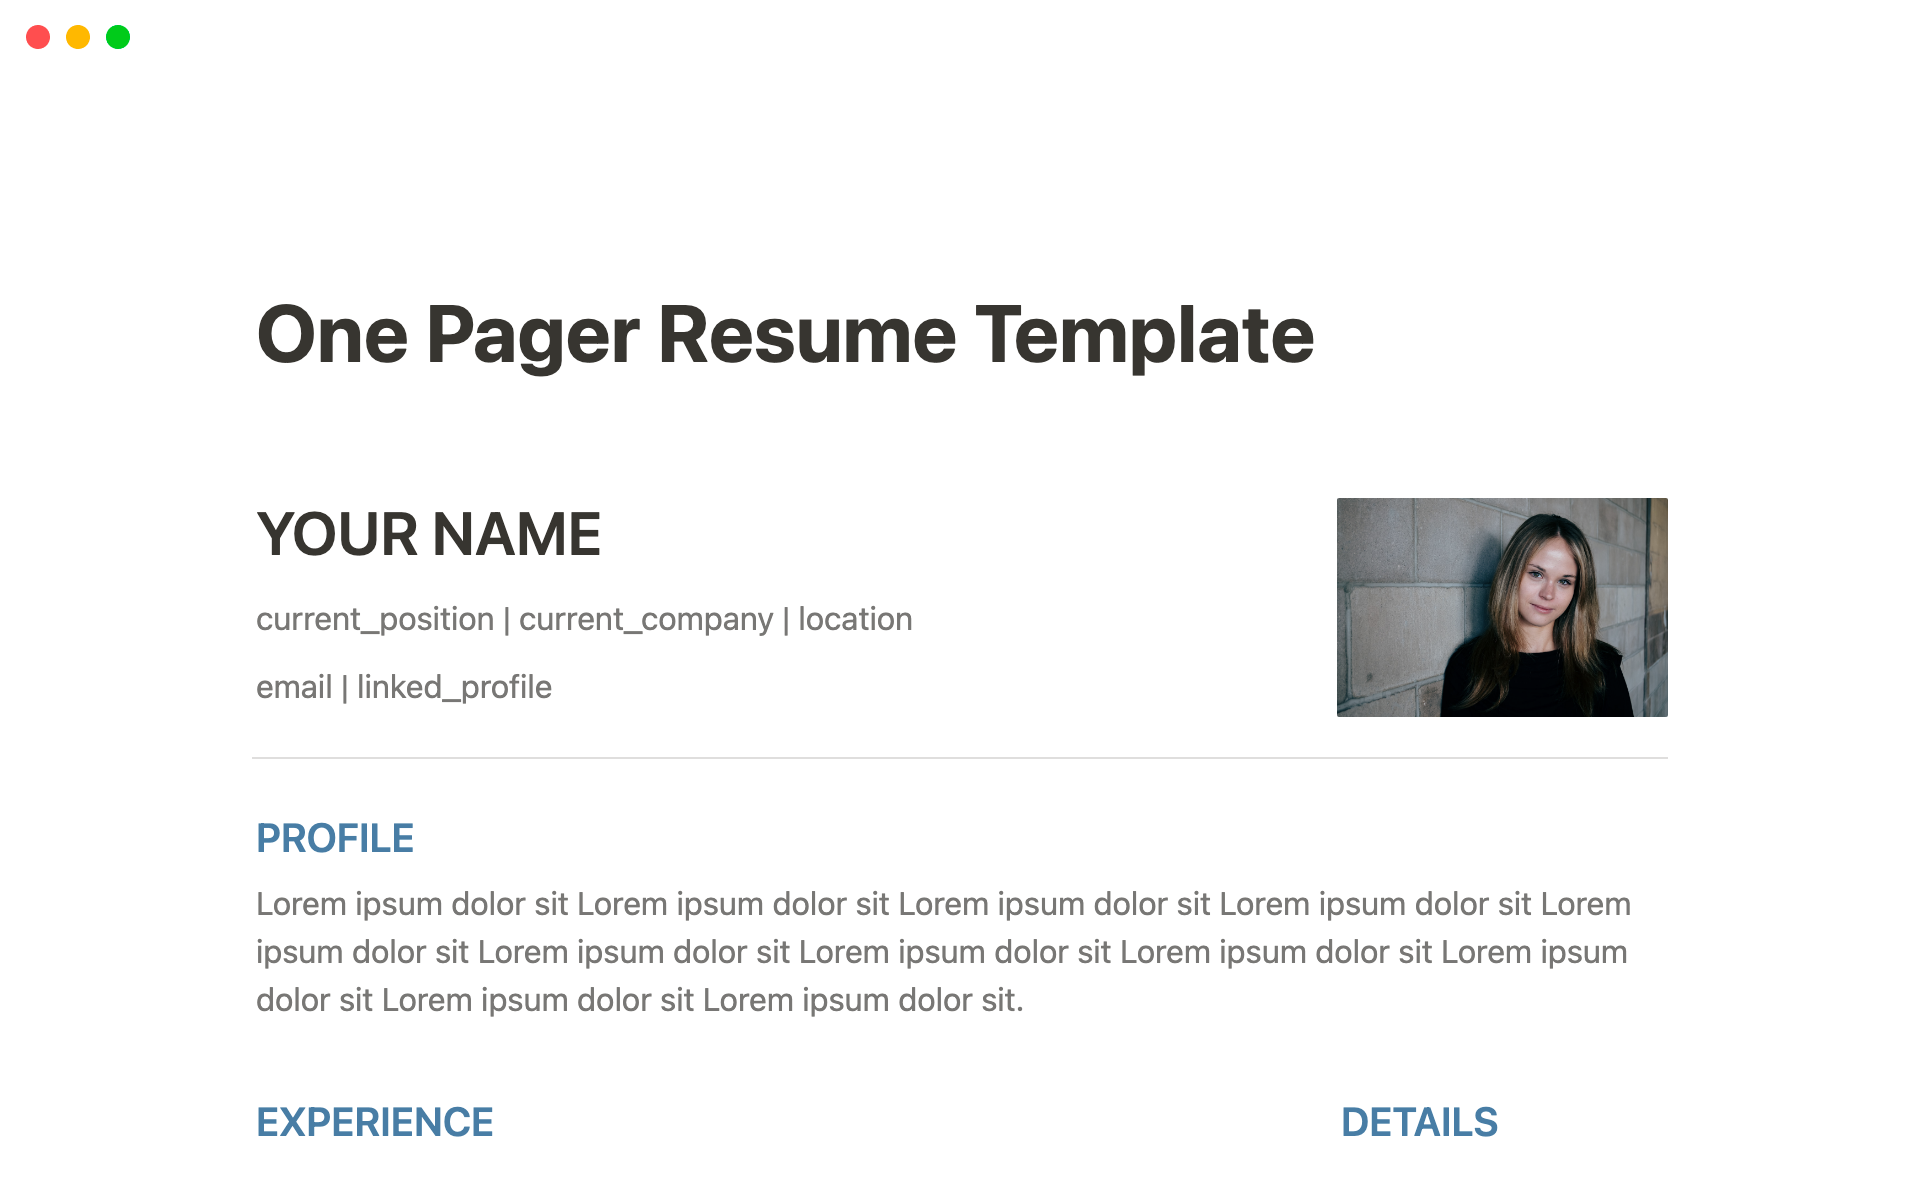 A template preview for One Pager Resume Template